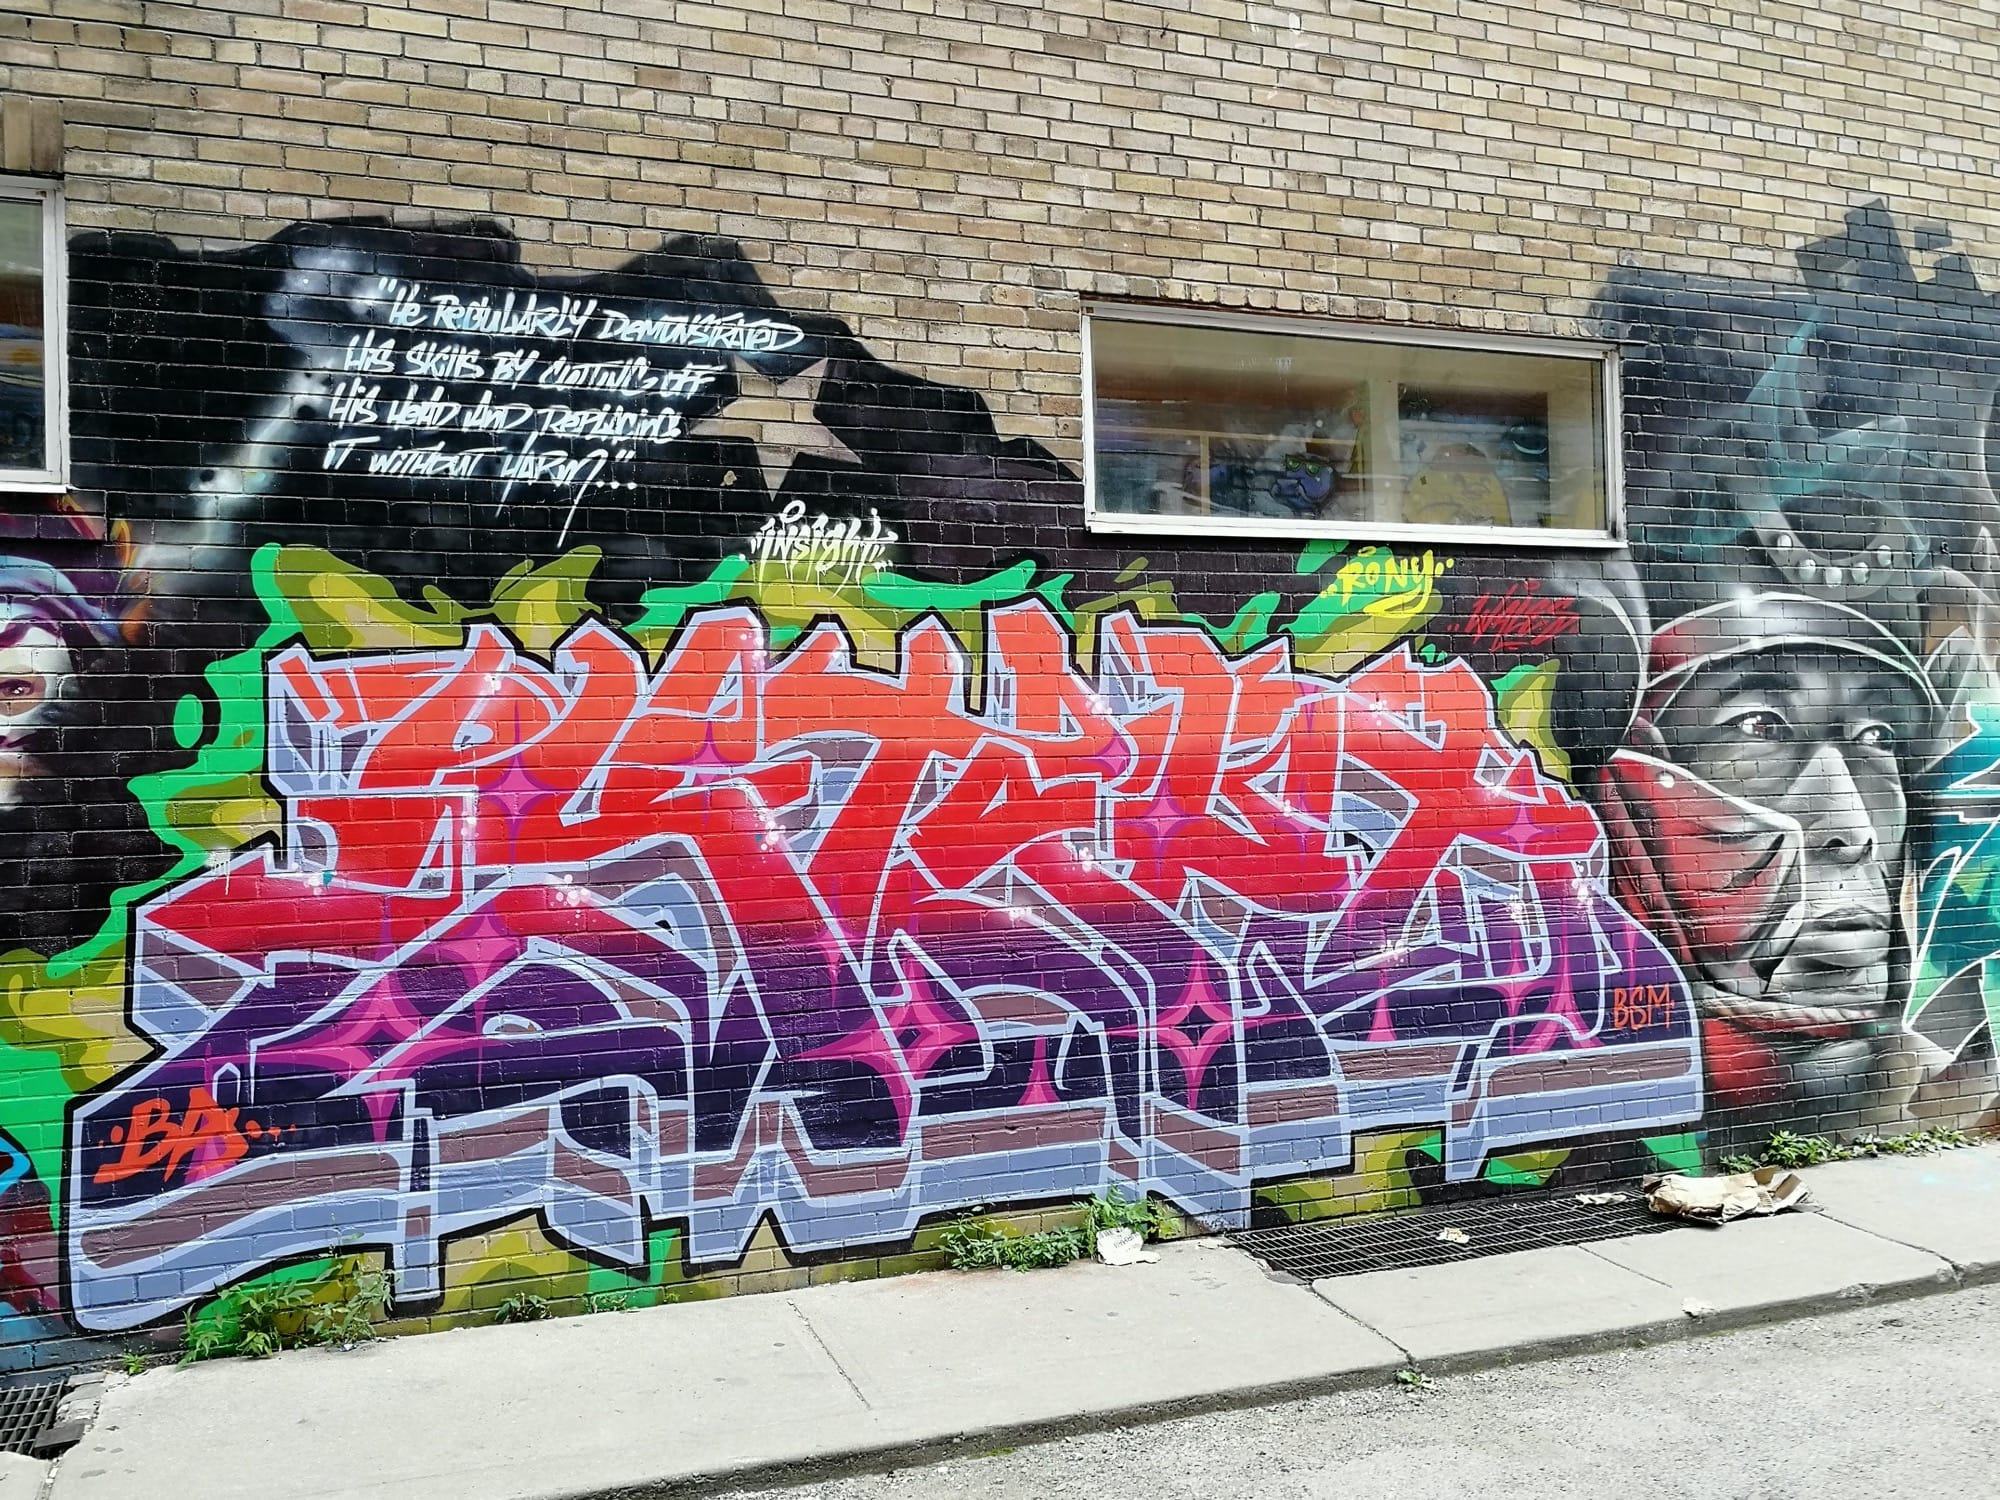 Graffiti 2567  captured by Rabot in Toronto Canada